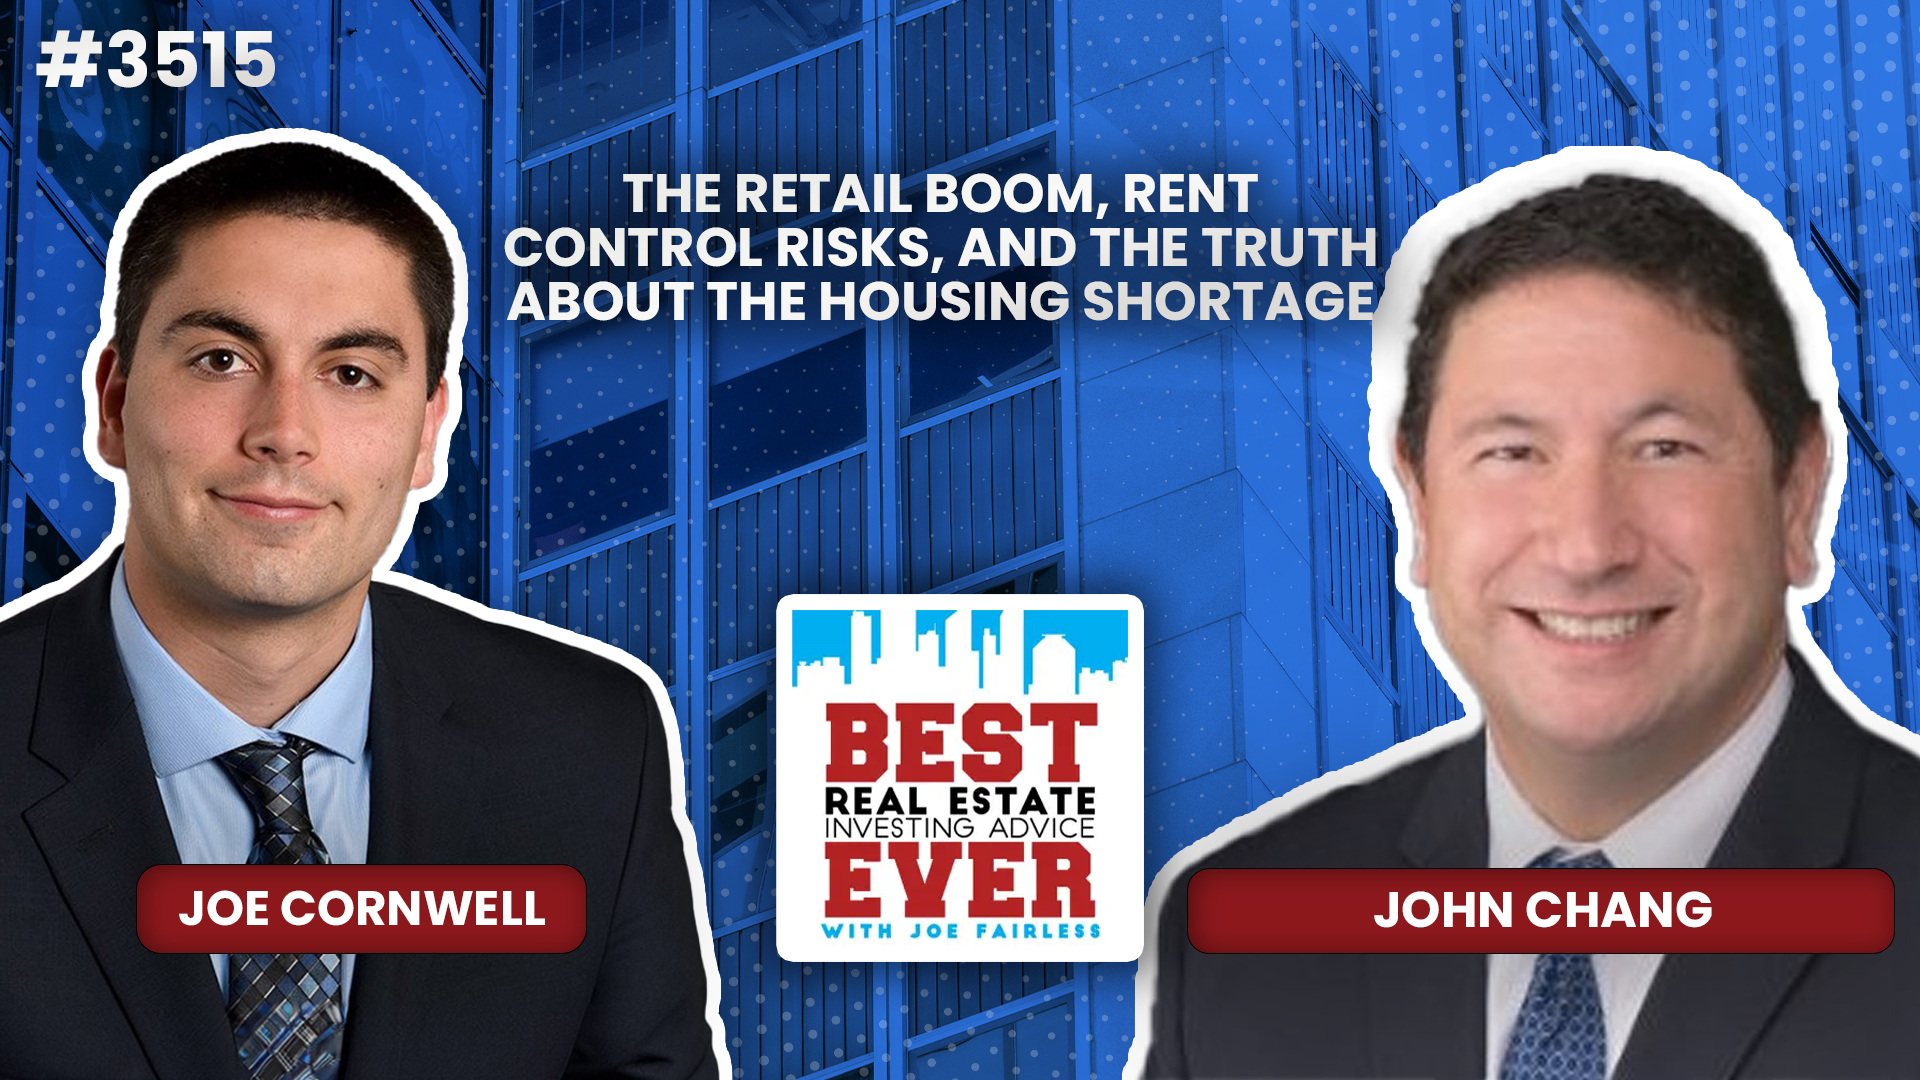 JF3515: The Retail Boom, Rent Control Risks, and the Truth About the Housing Shortage ft. John Chang